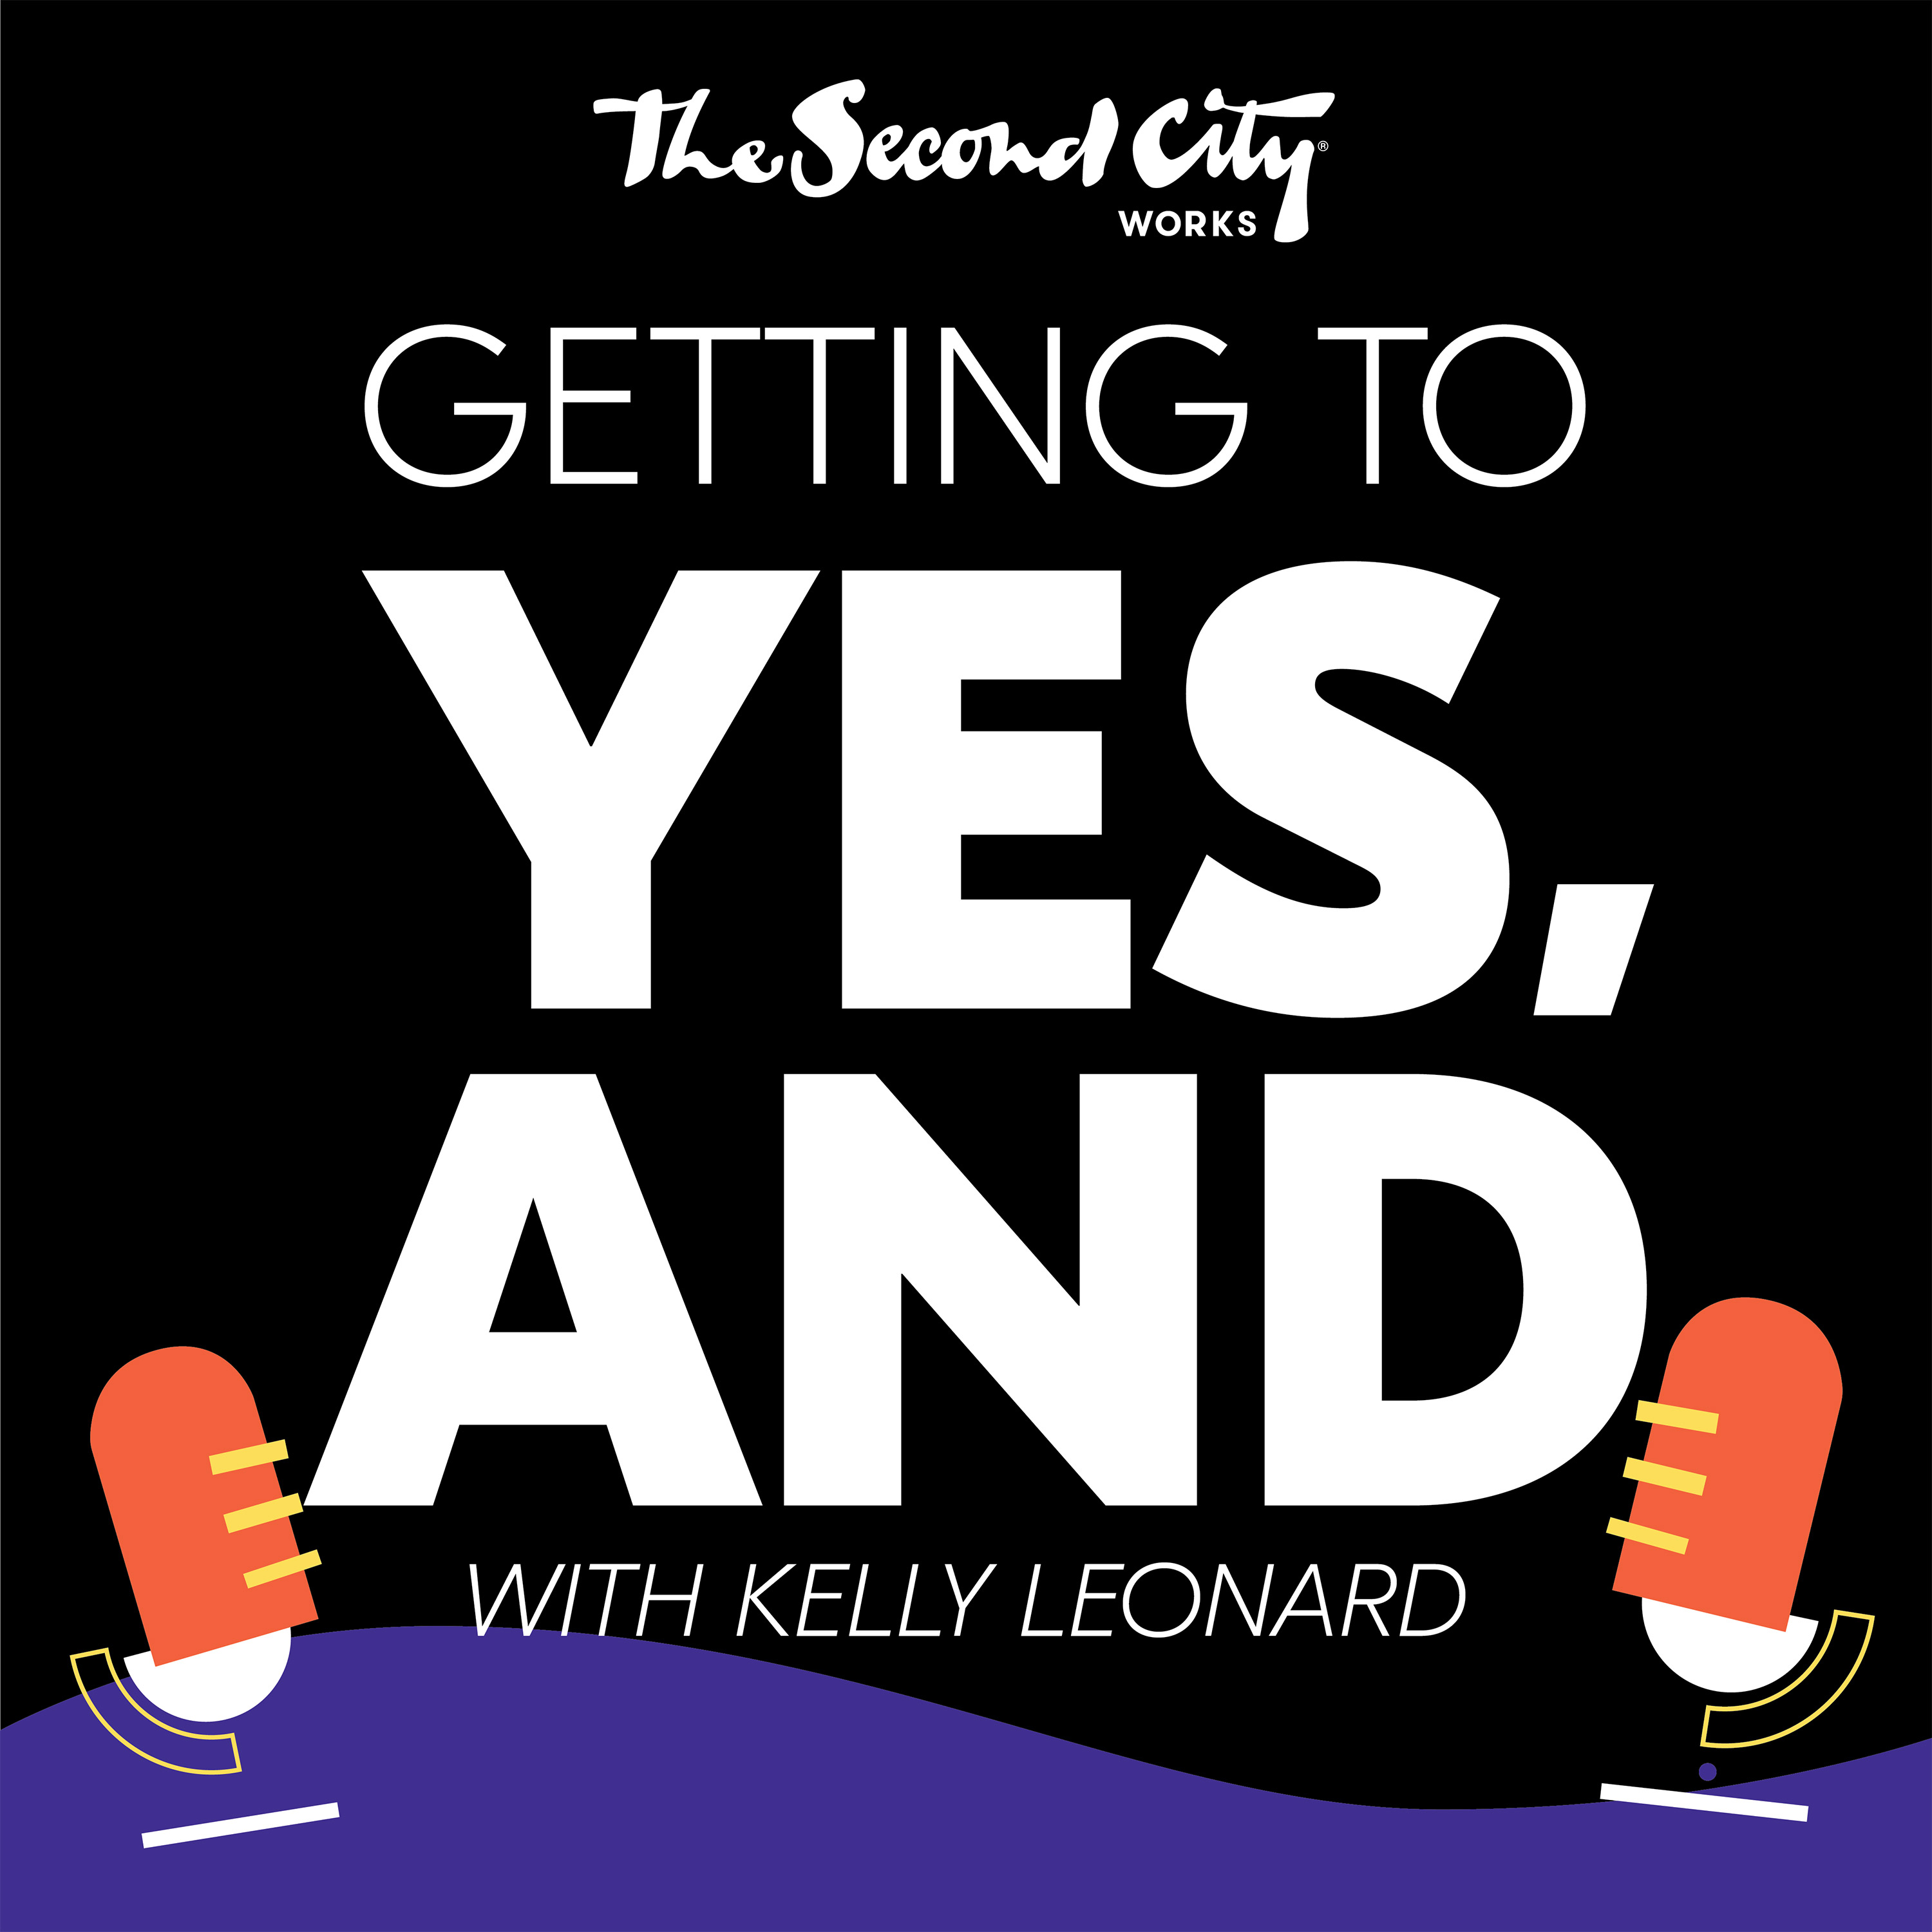 Second City Works presents “Getting to Yes, And”